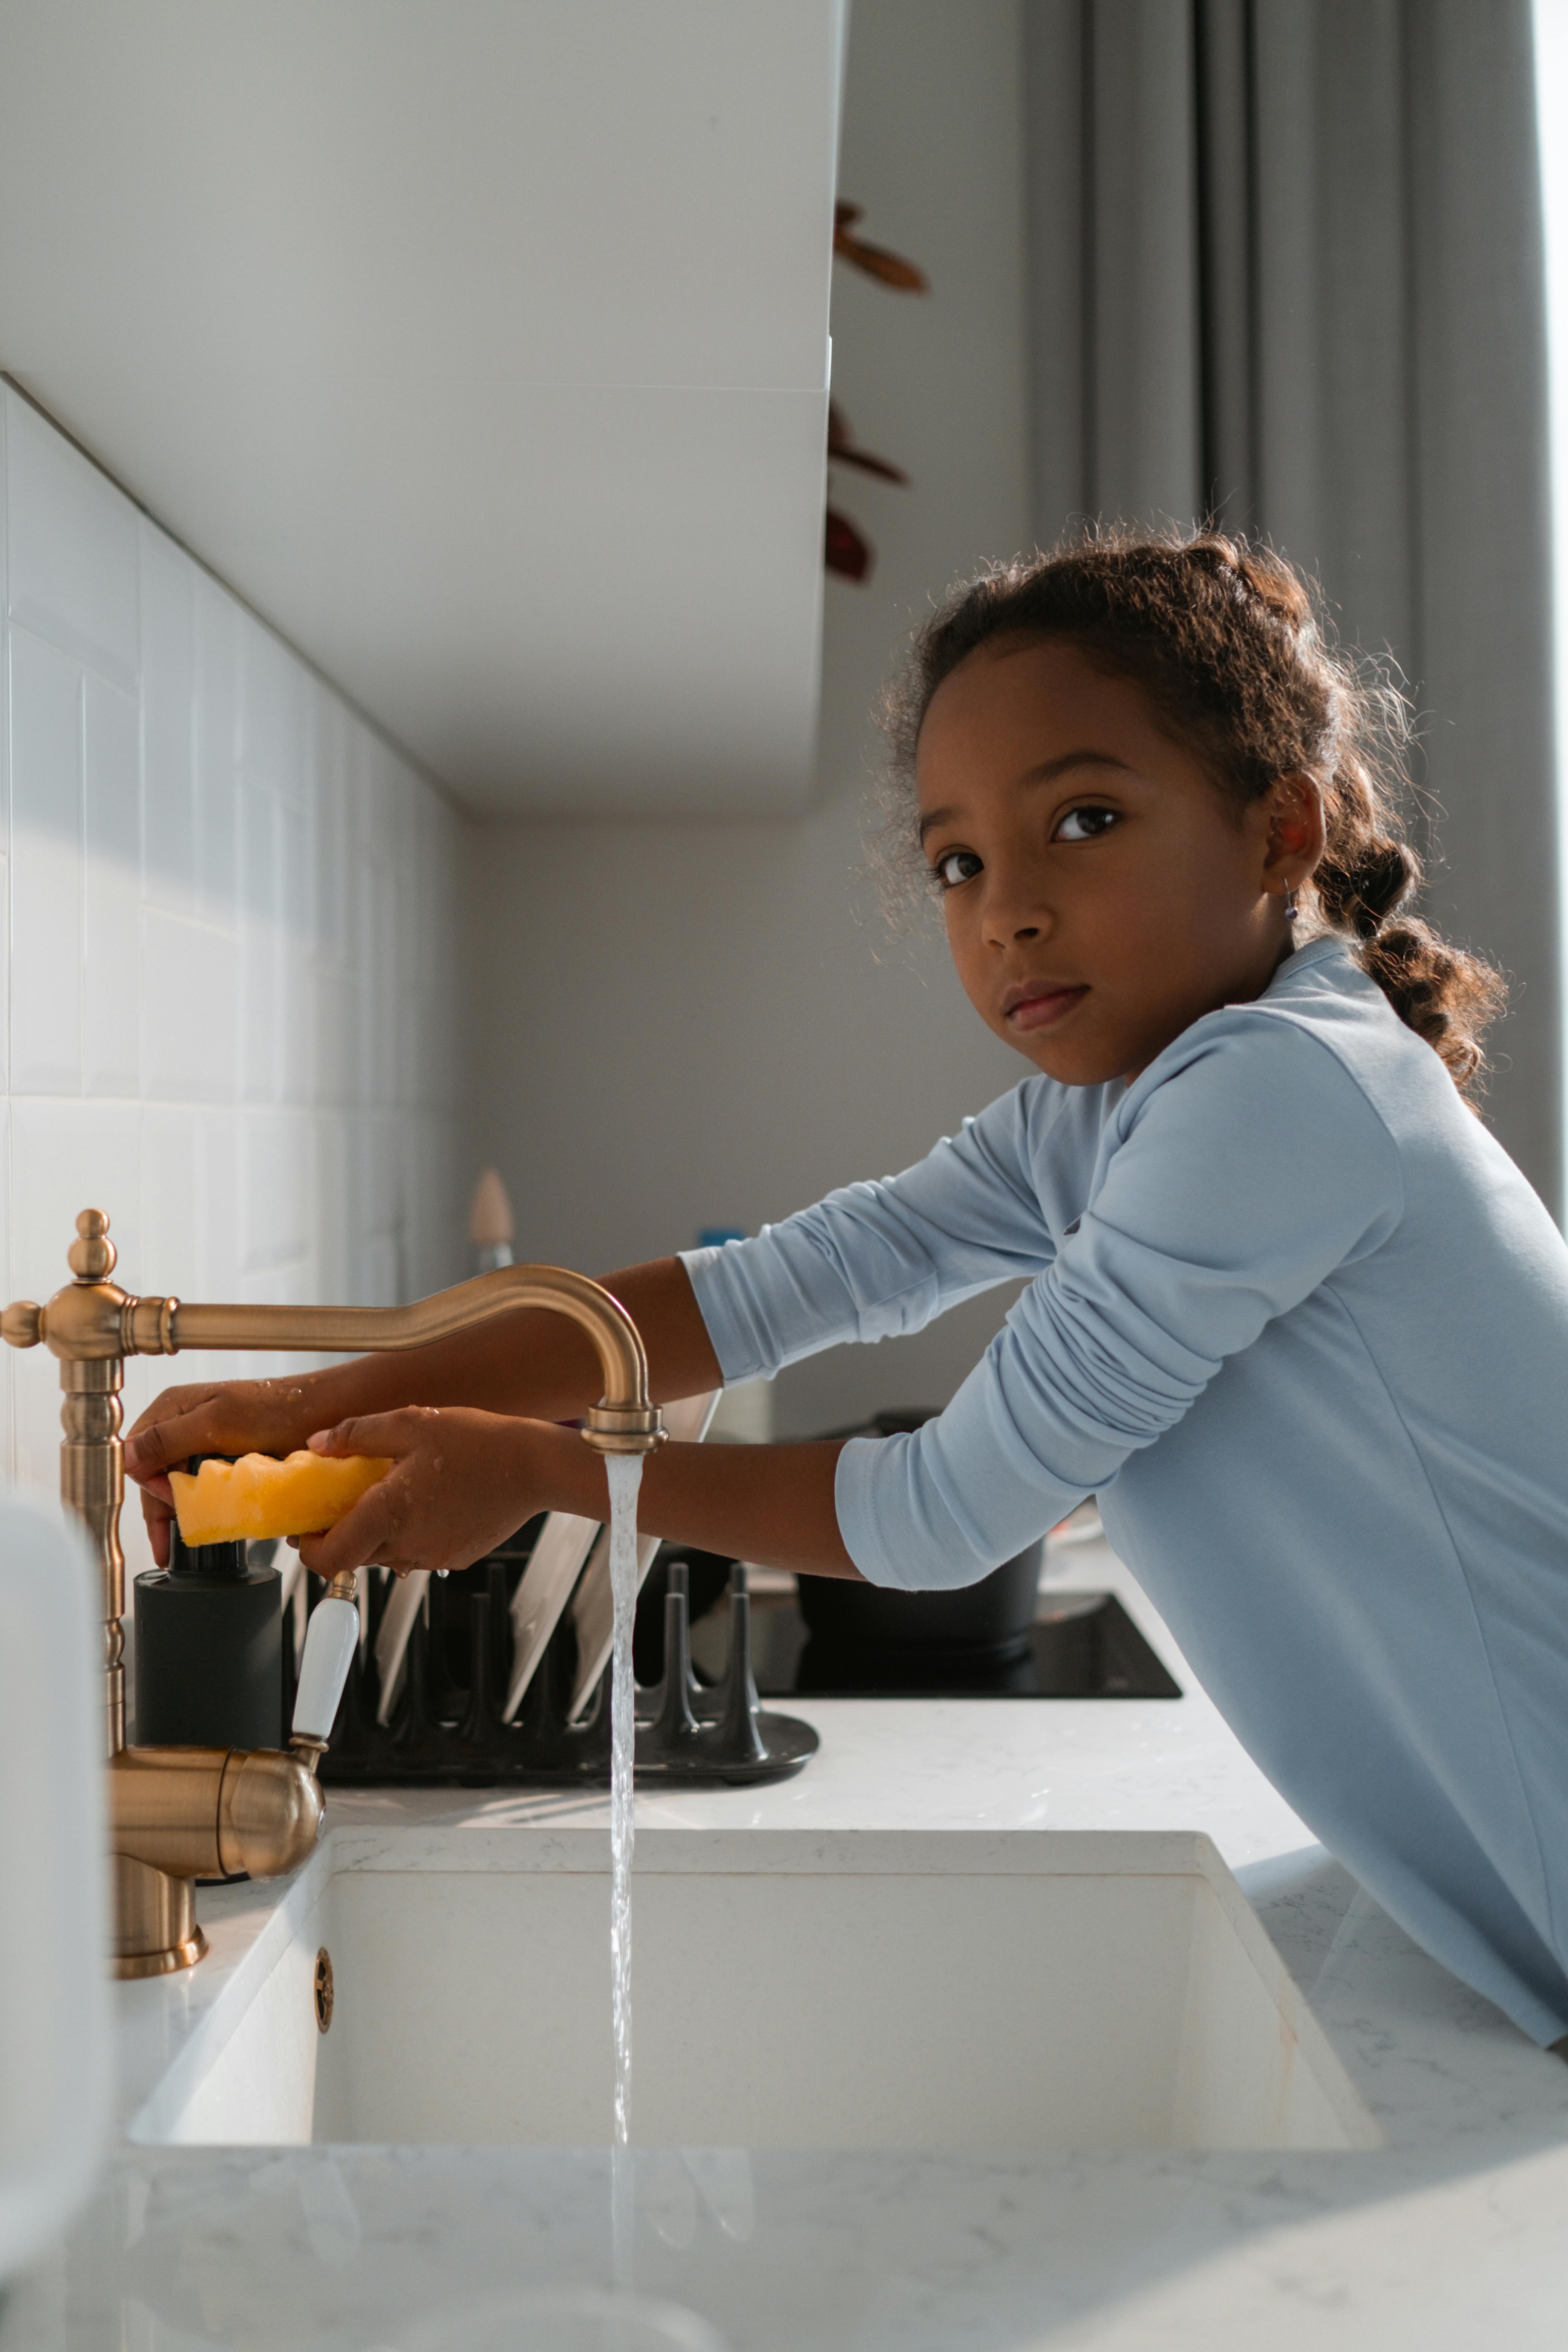 A little girl running water at the kitchen sink | Source: Pexels